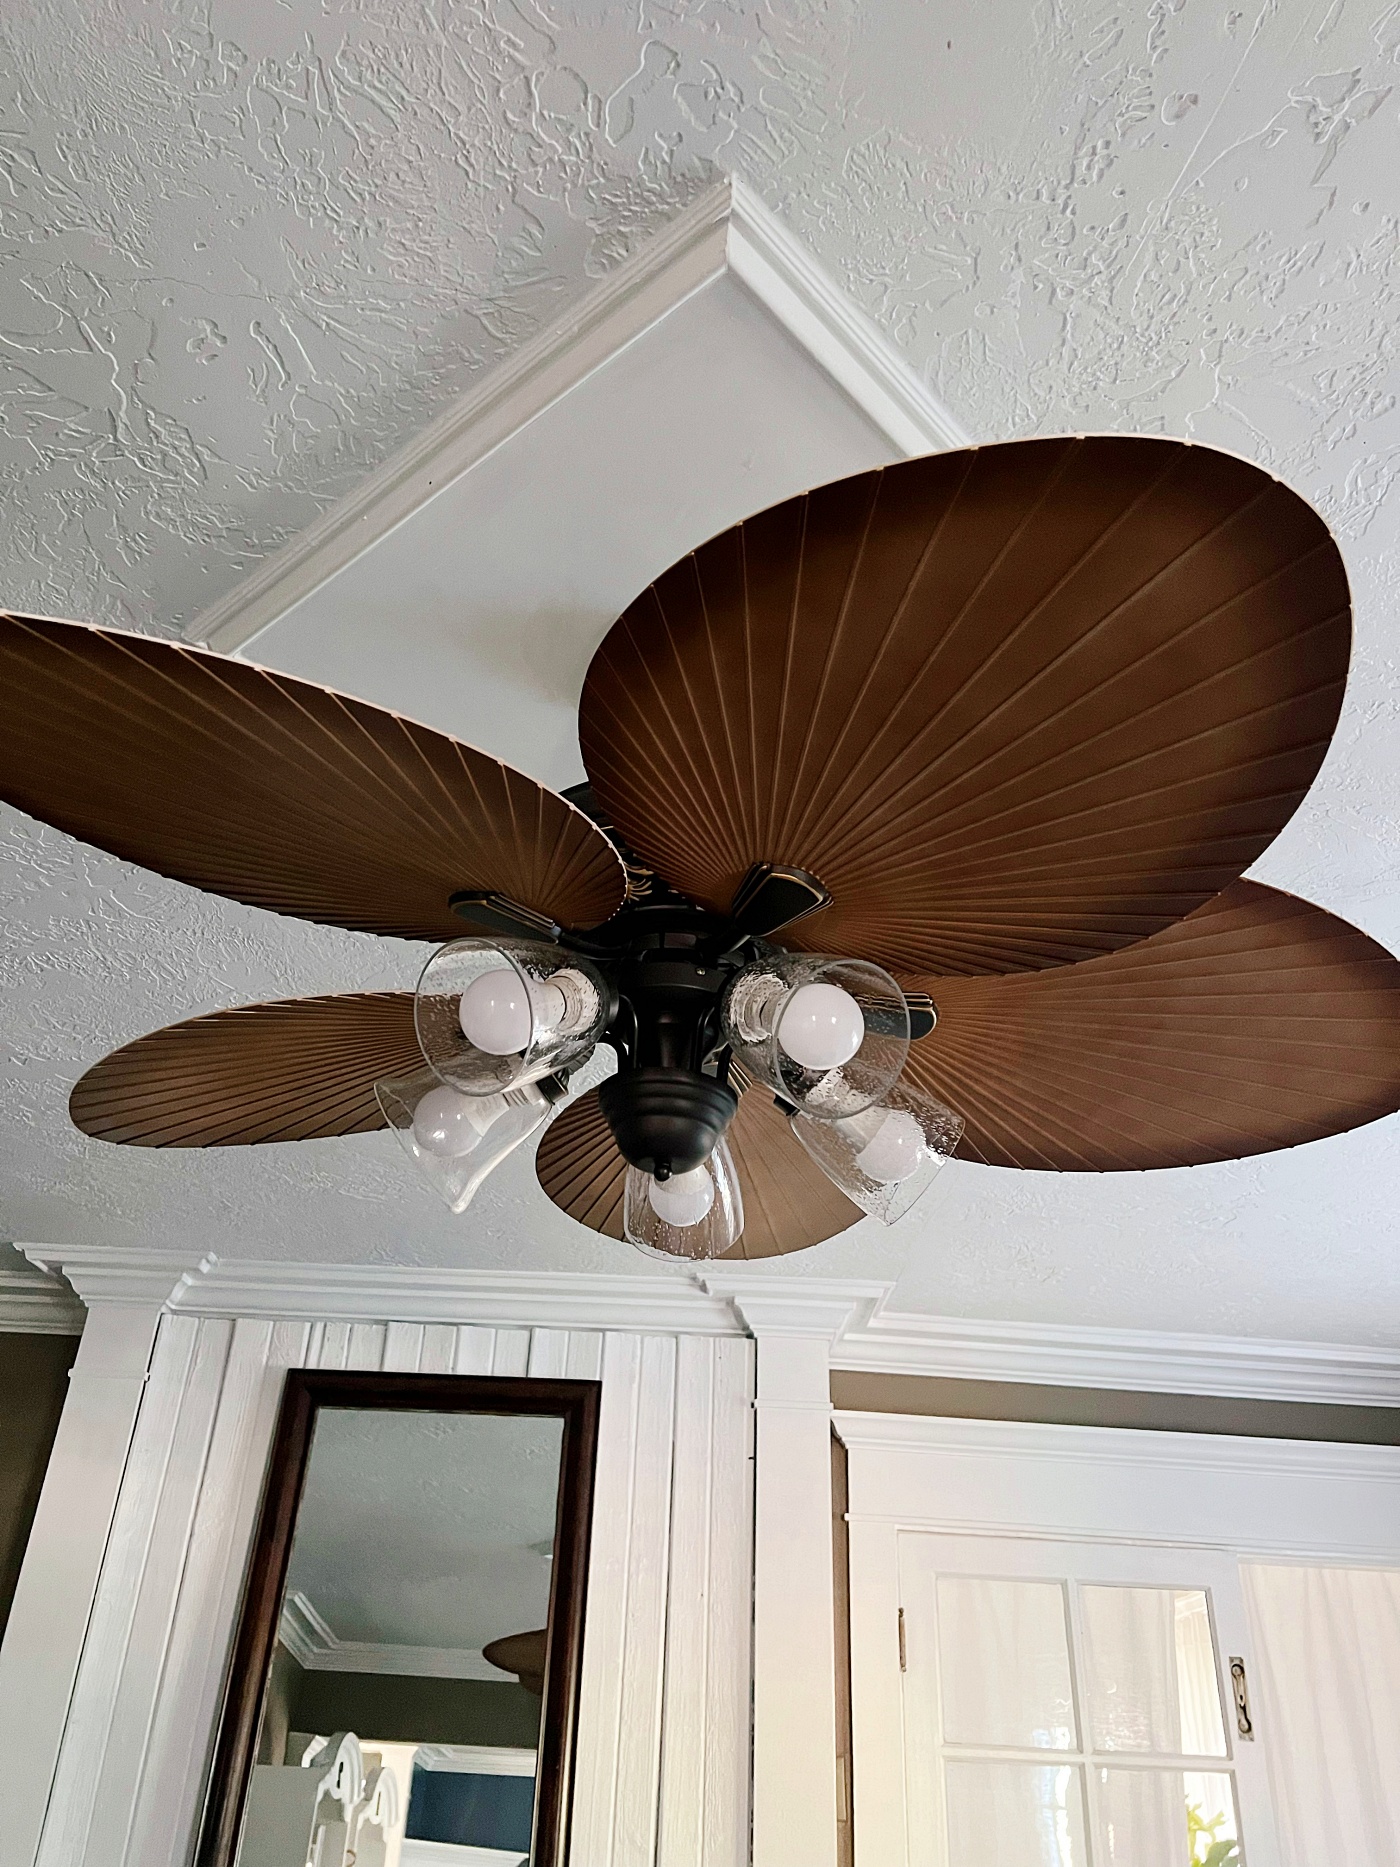 New Tropical Palm Ceiling Fan In Our